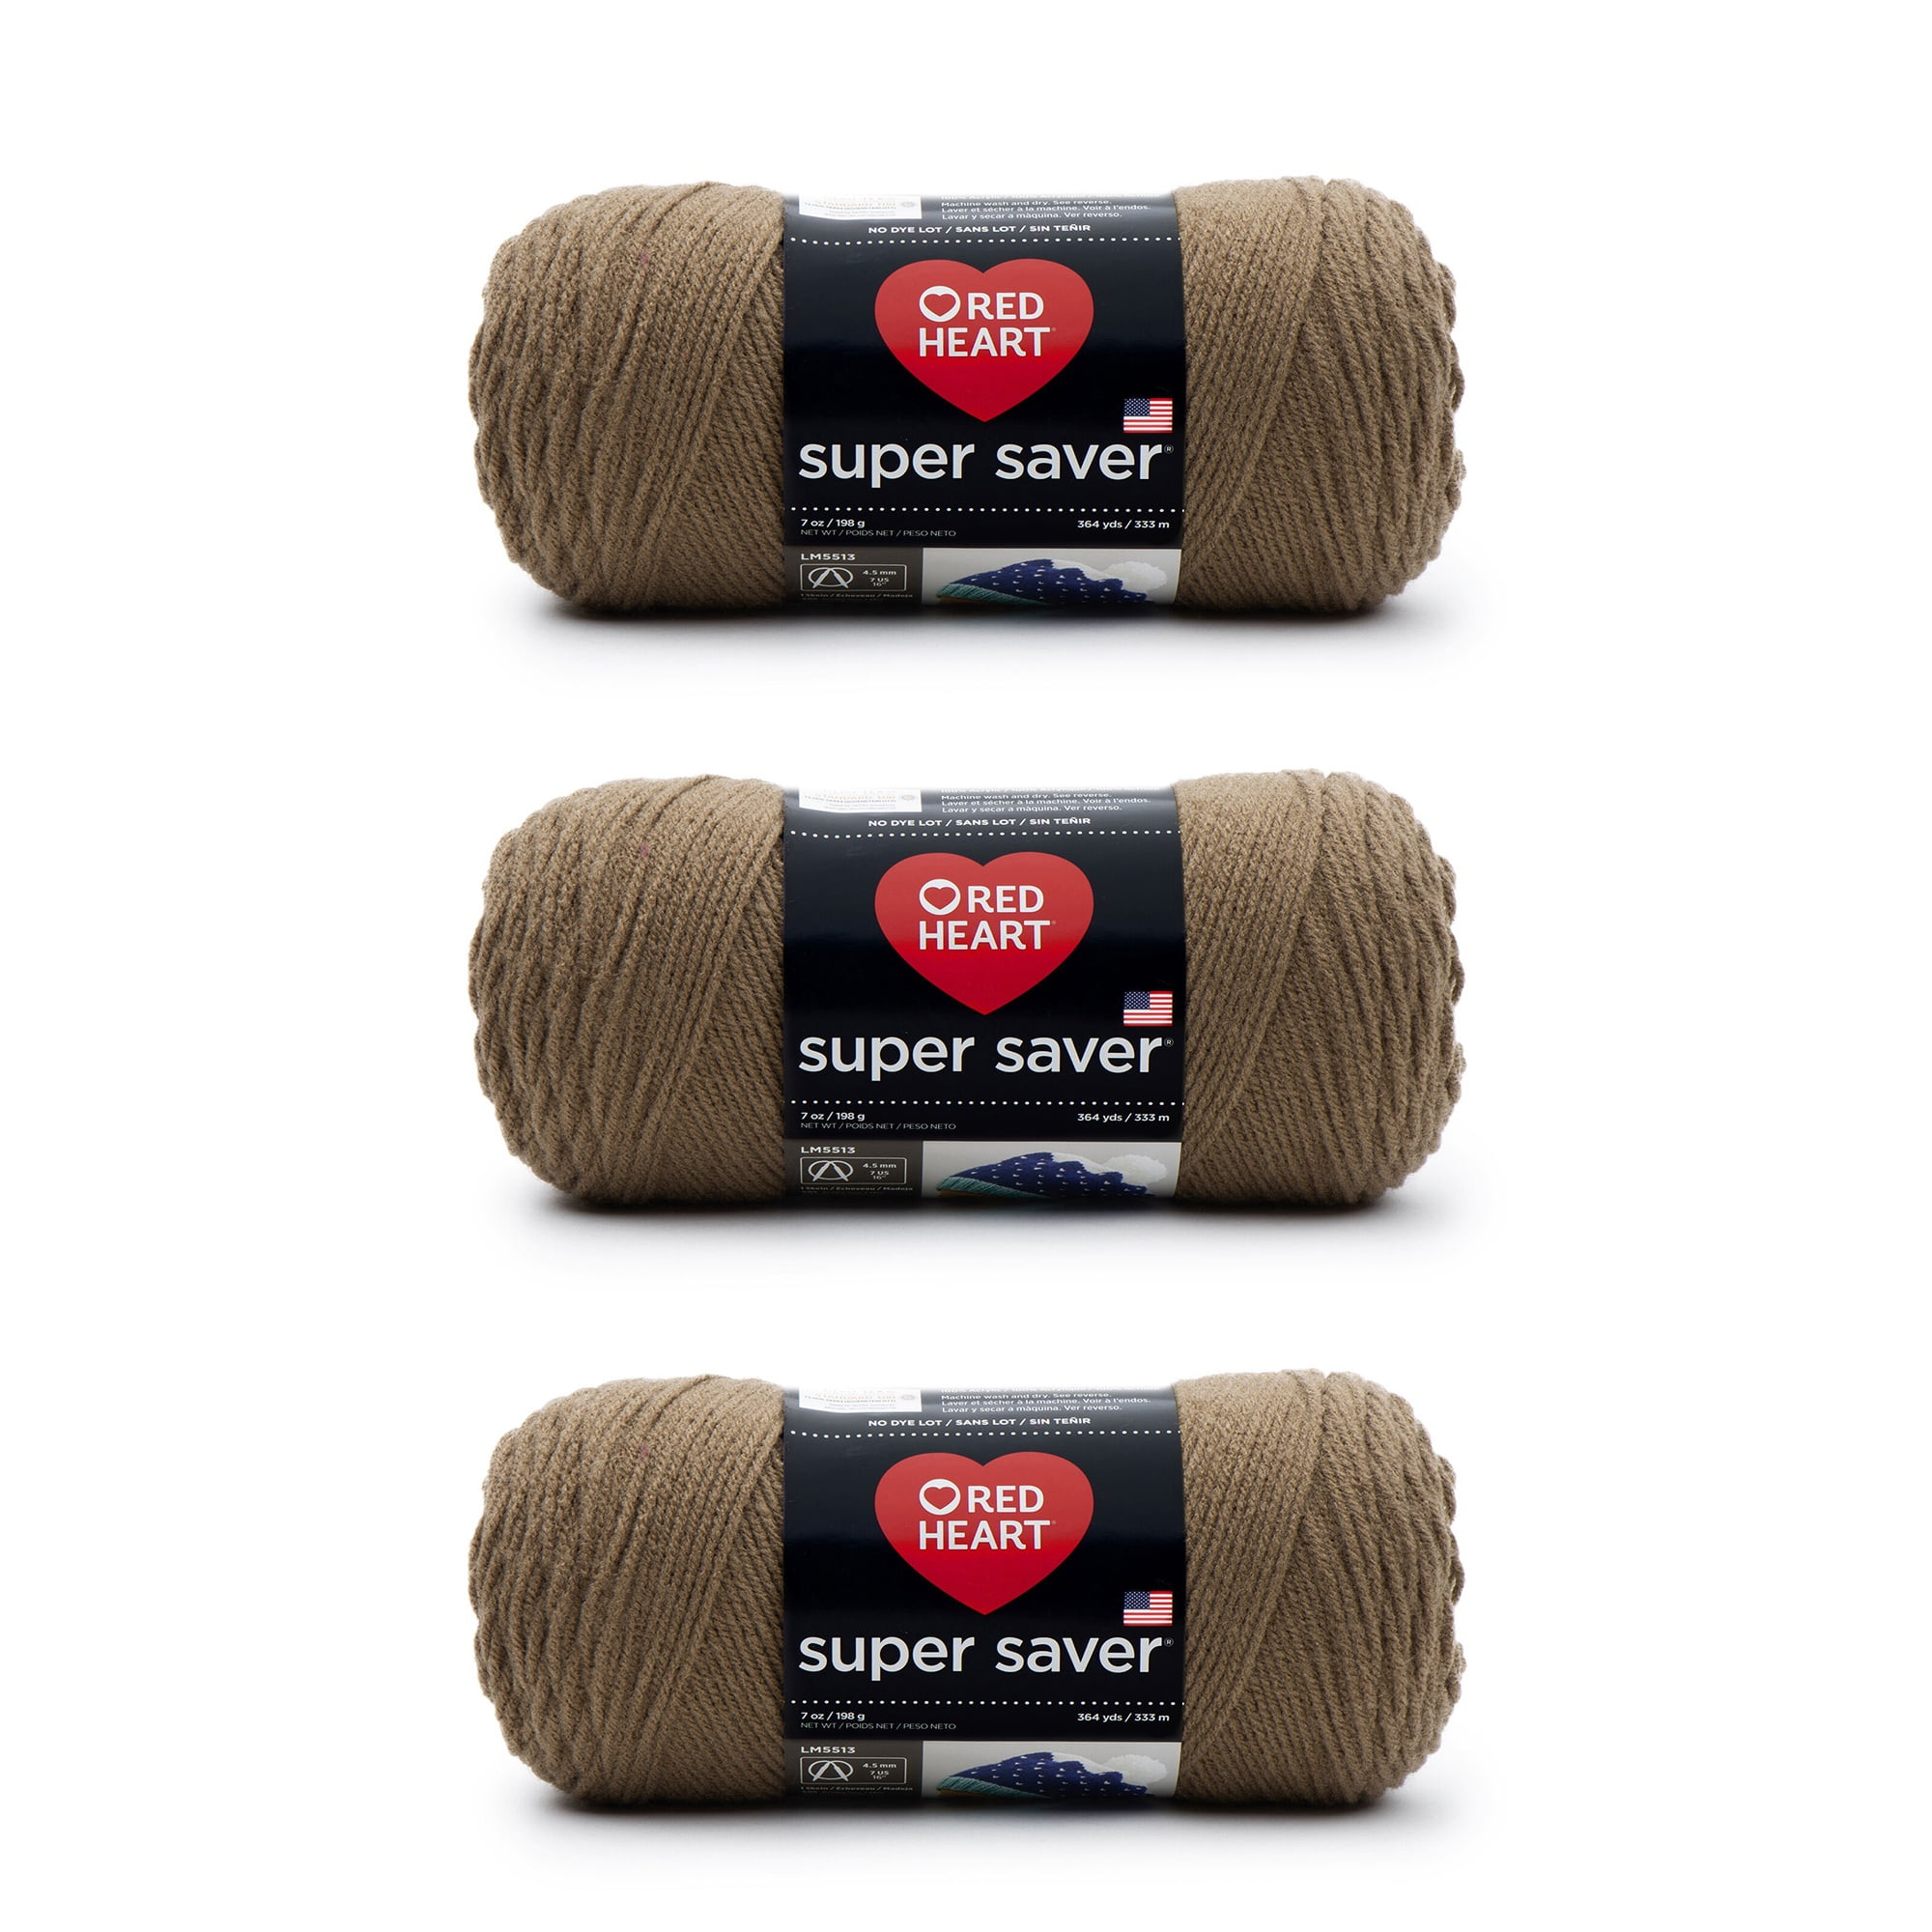 Red Heart Super Saver Yarn-Polo Stripe, 1 count - City Market